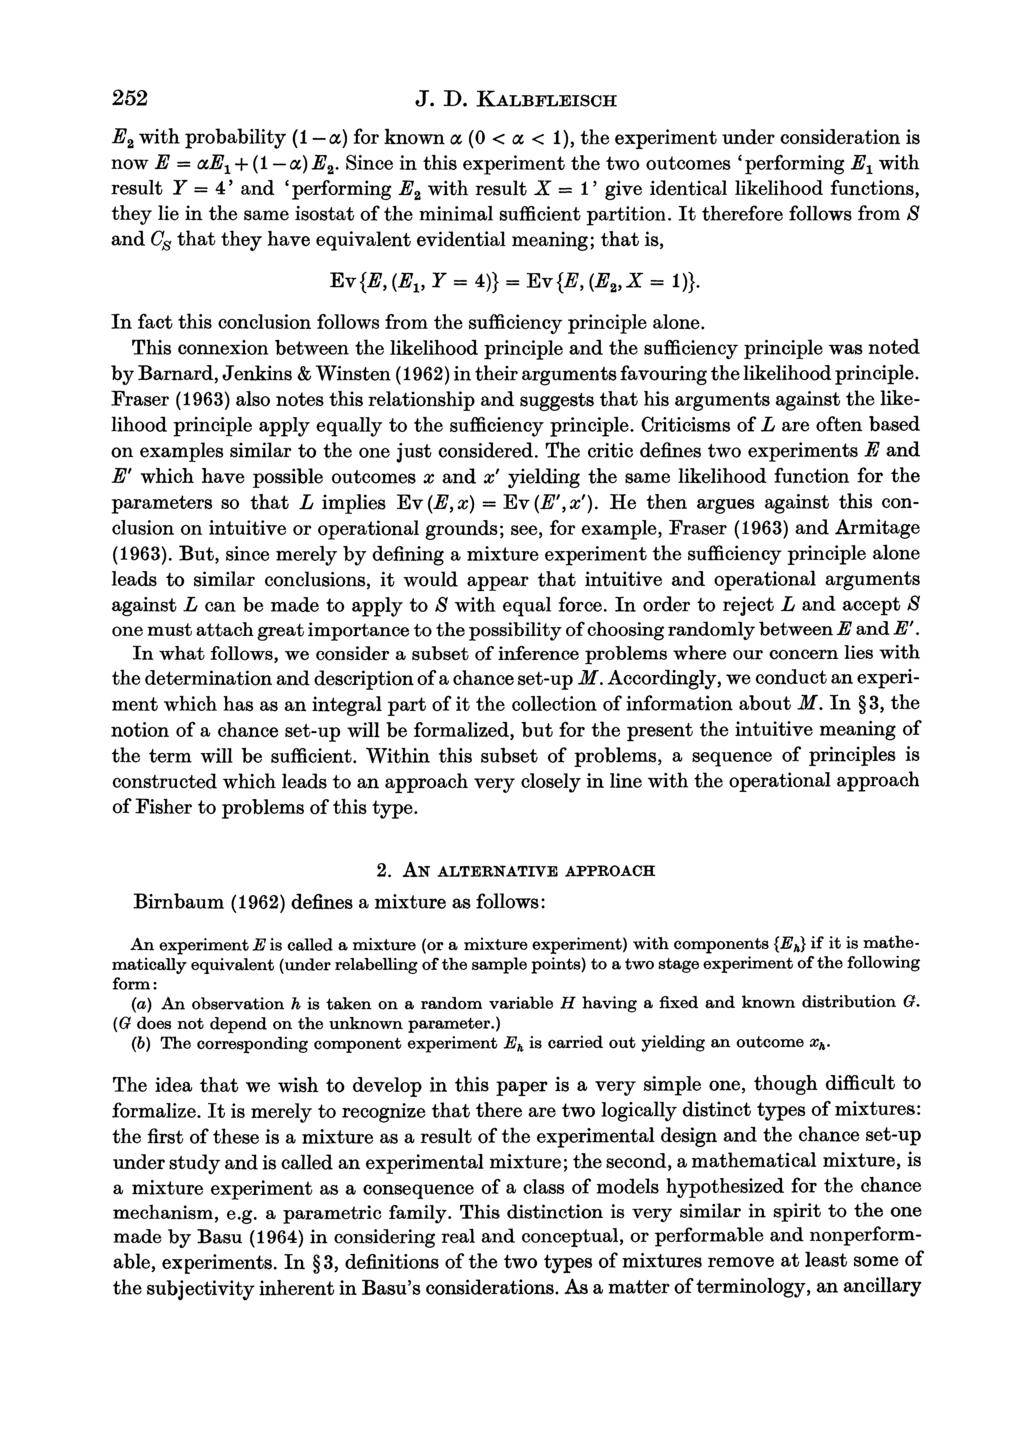 252 J. D. KALBFLEISCH E2 with probability (1- a) for known a (O < a < 1), the experiment under consideration is now E = ael + (1- a) E2.